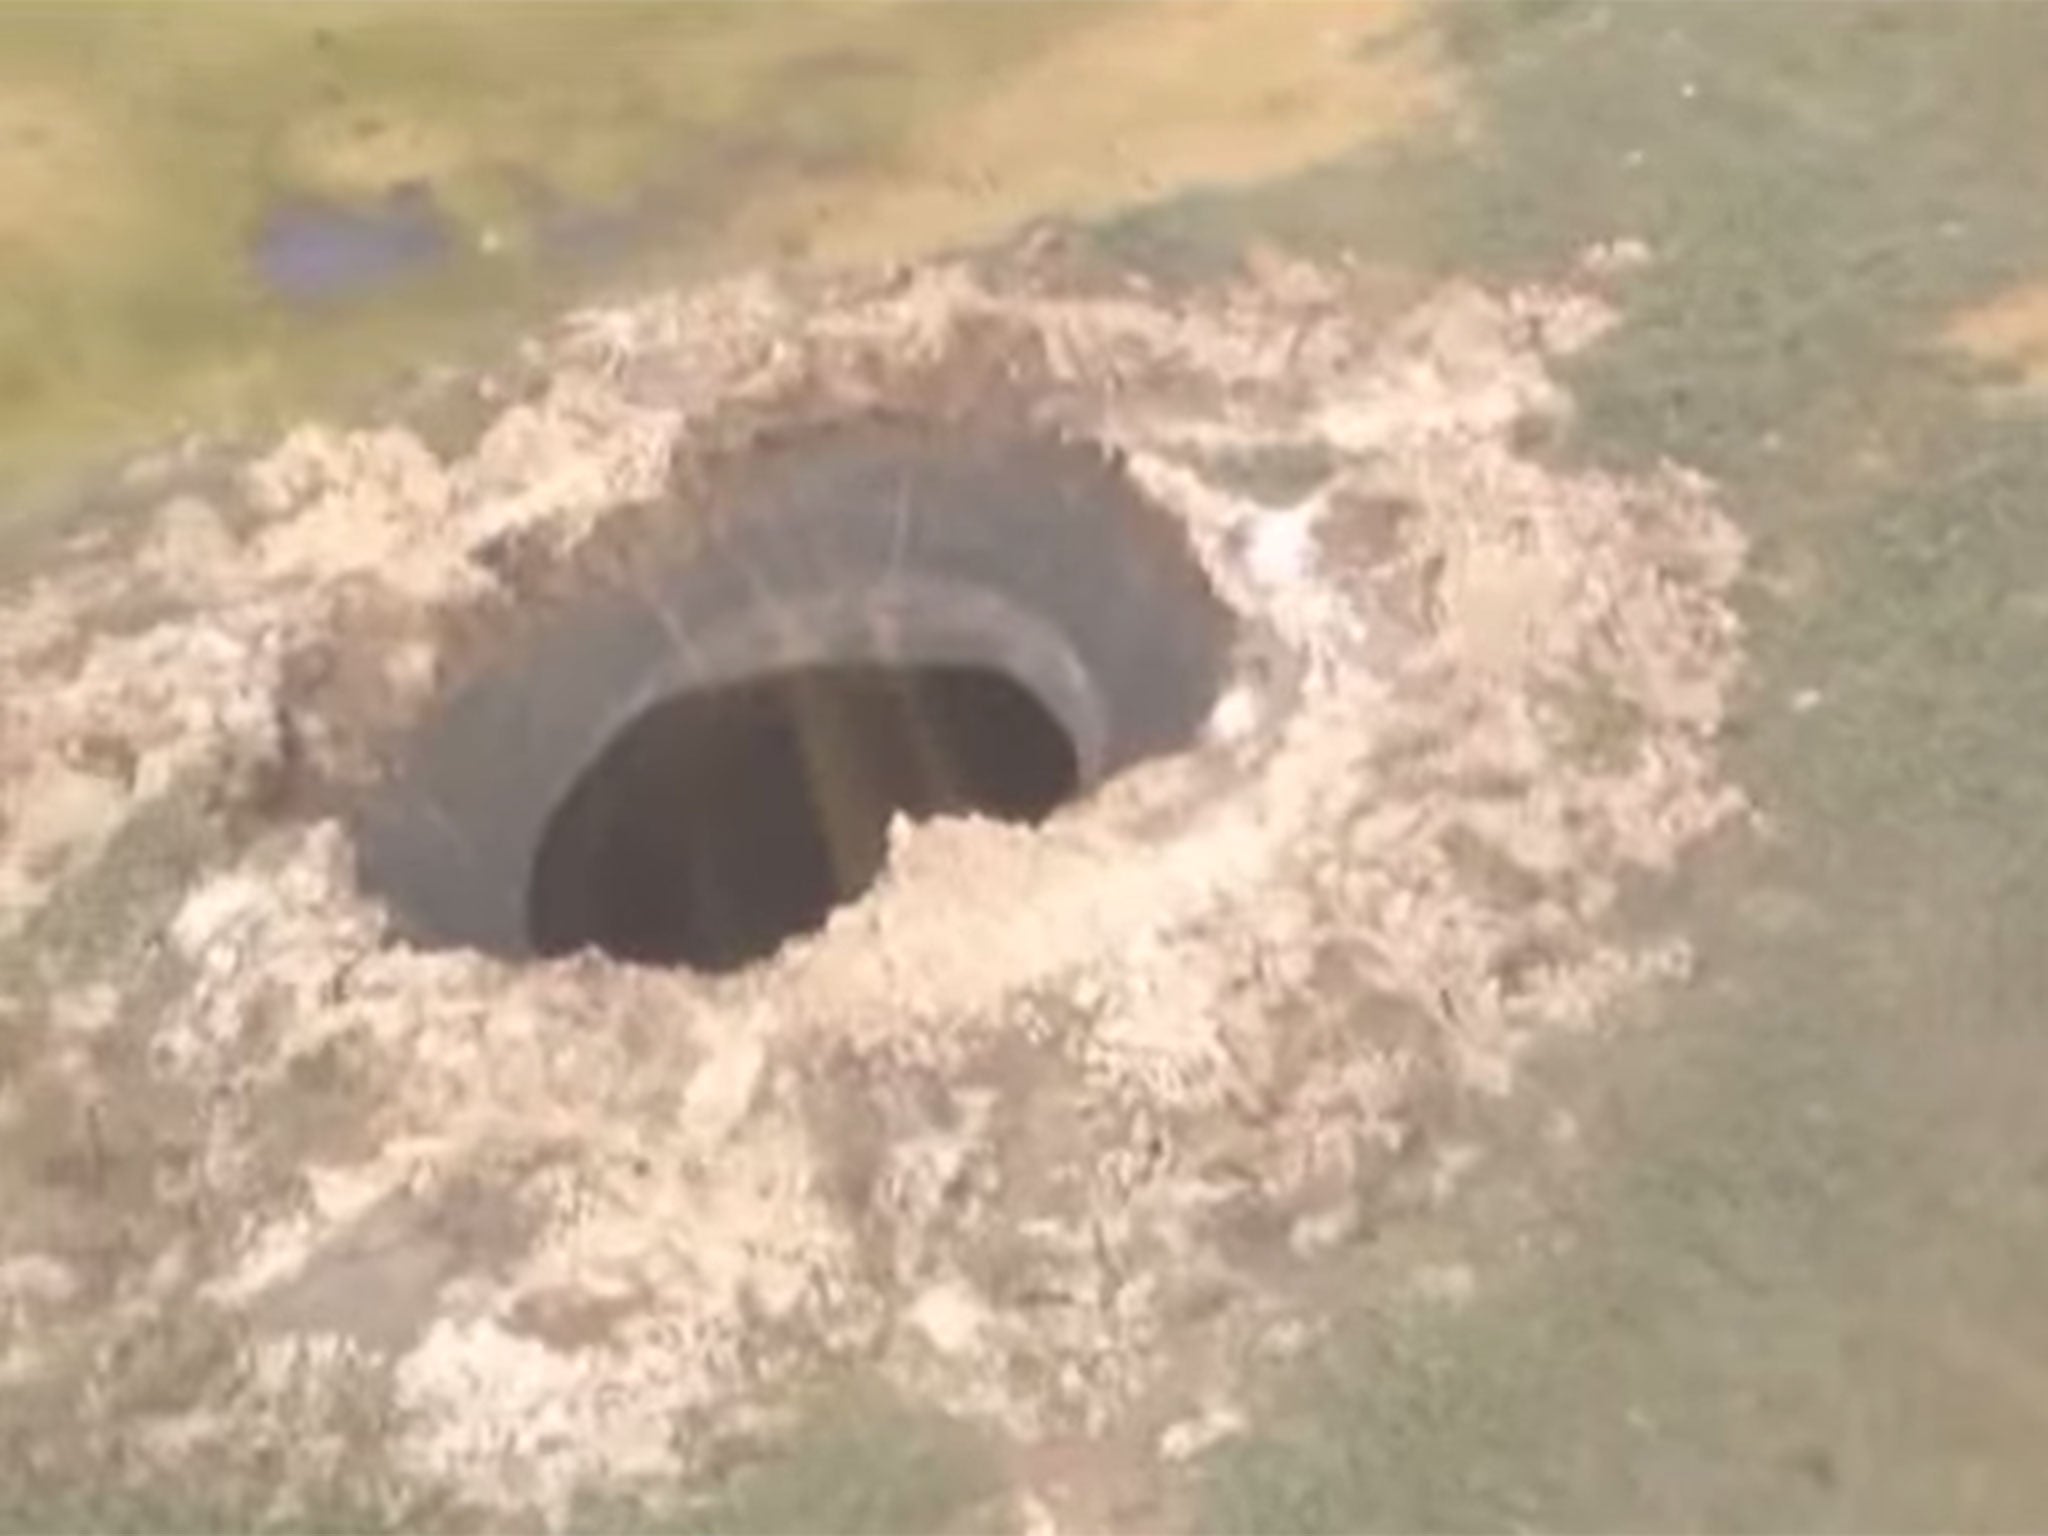 The mysterious giant hole in Siberia